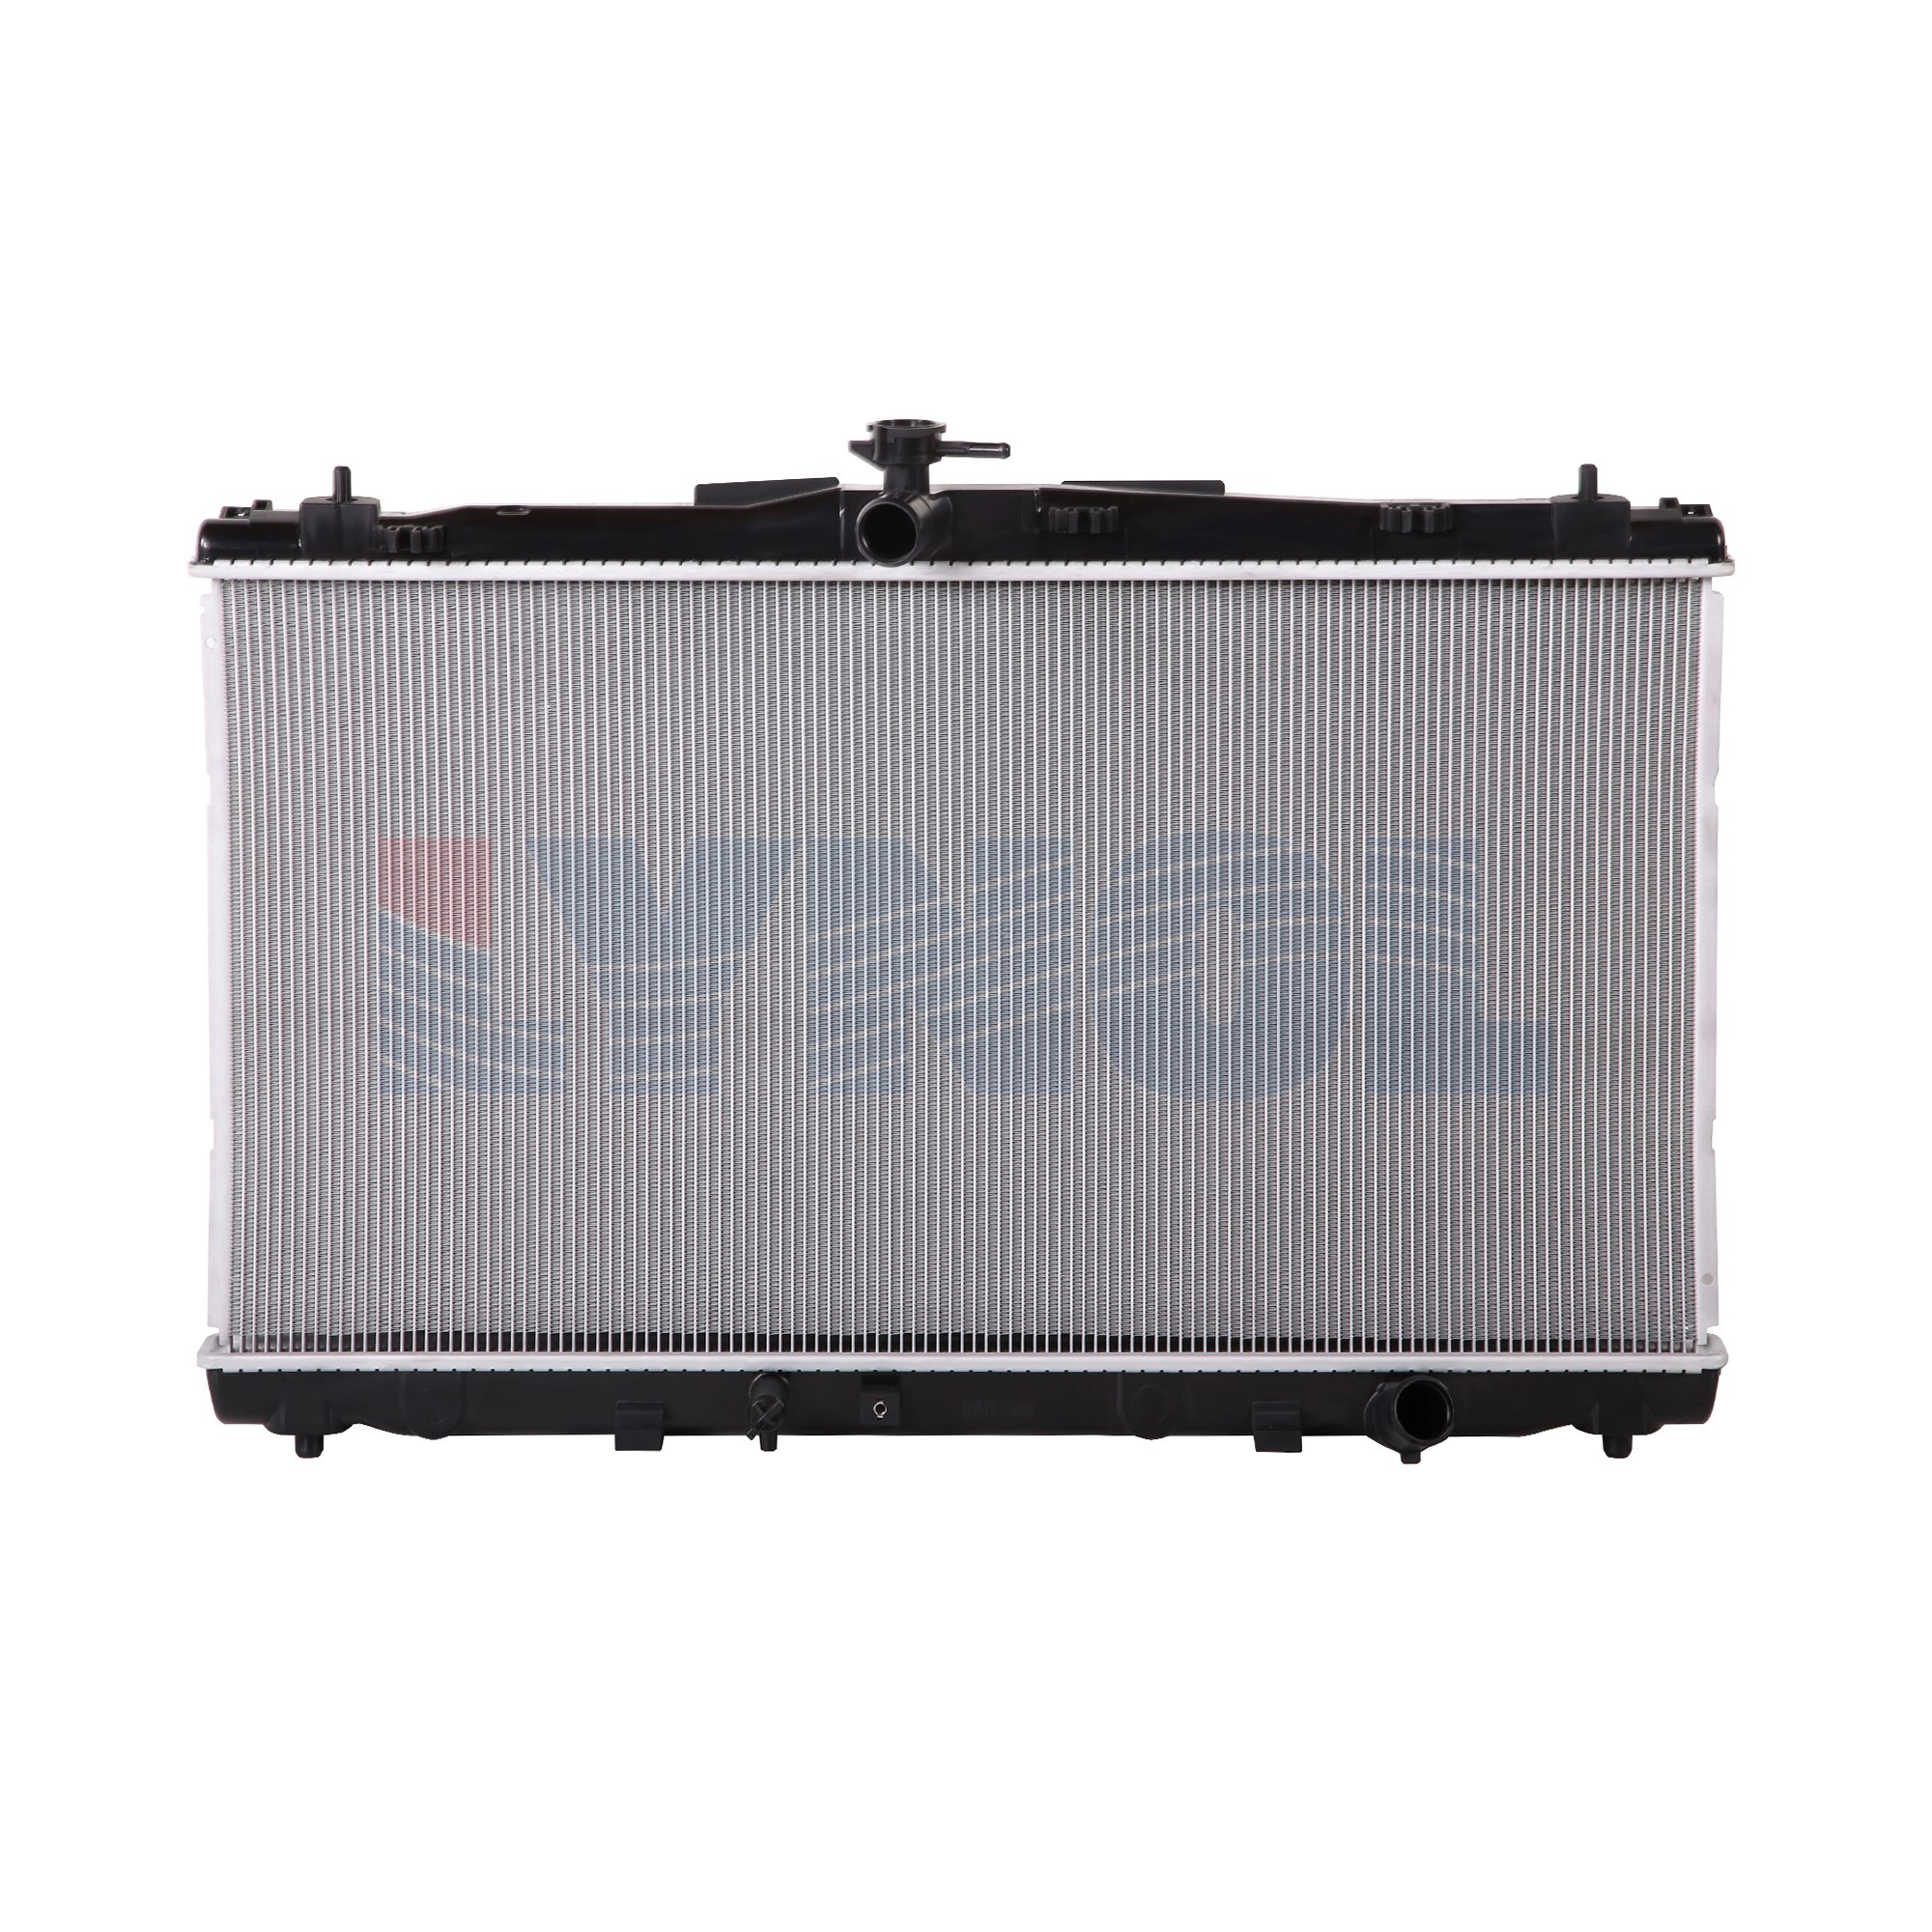 13269 -  RADIATOR - 12-17 Toyota Camry L4 2.5L, (combo design, four installation holes on the top tank)